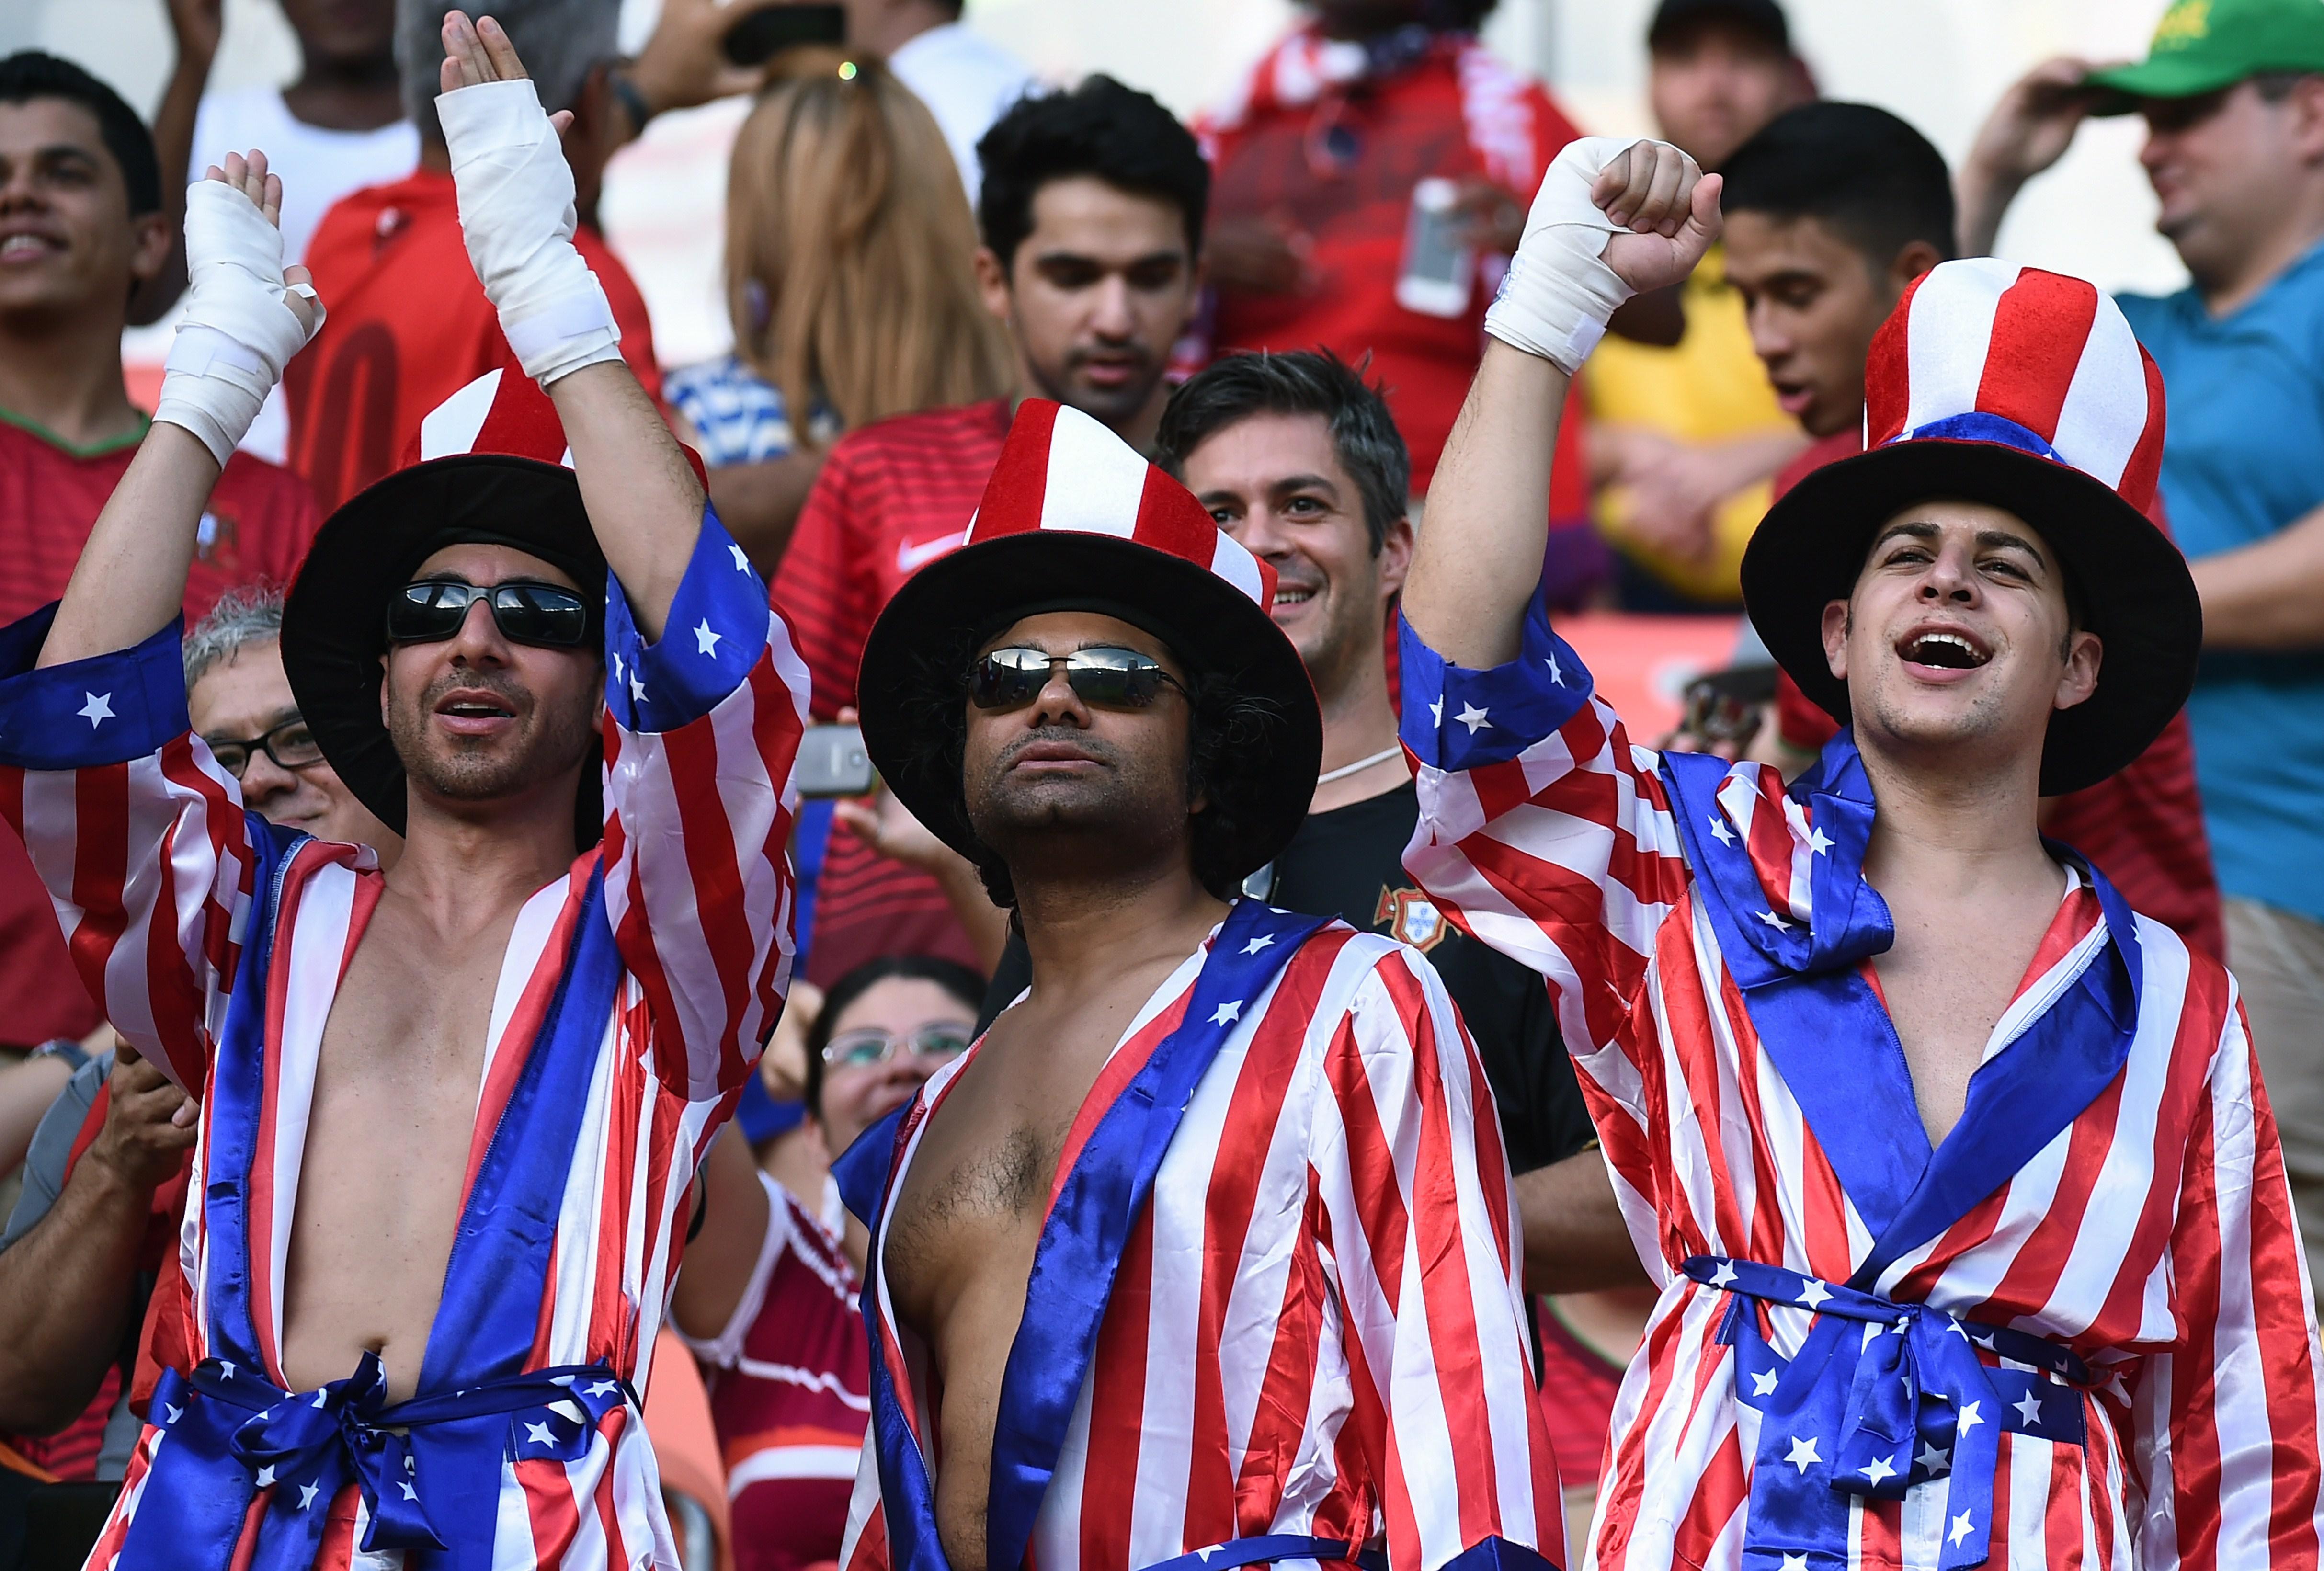 U.S. fans cheer before the start of the World Cup match between the U.S. and Portugal in Manaus, Brazil, on June 22, 2014.